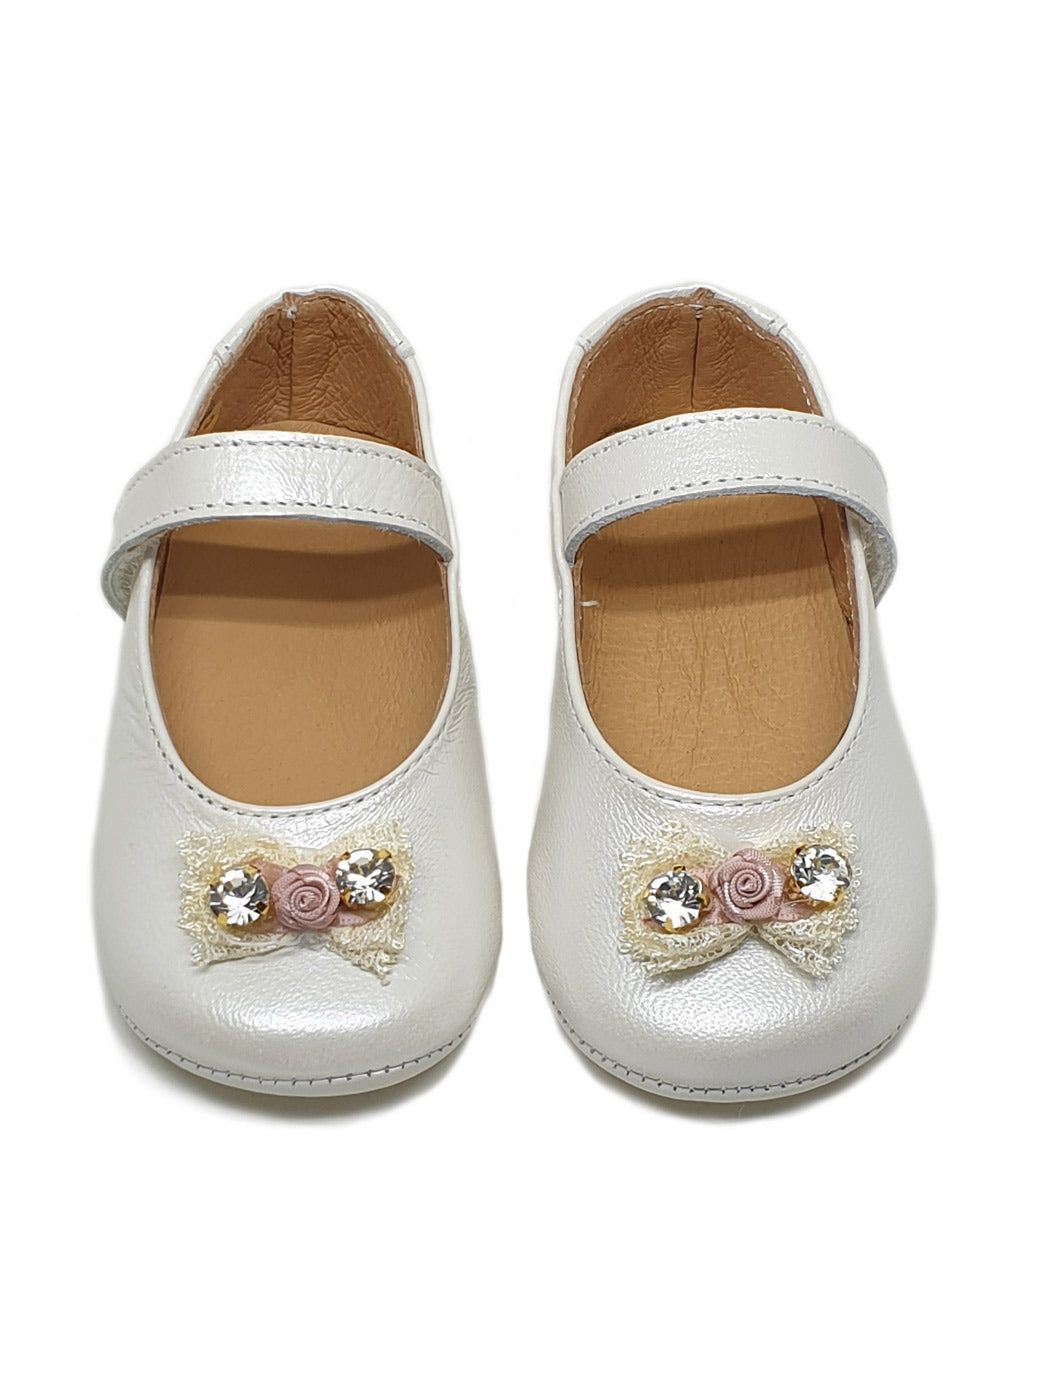 Leather Pre-Walker Shoes for baby-PR-M259-Cream